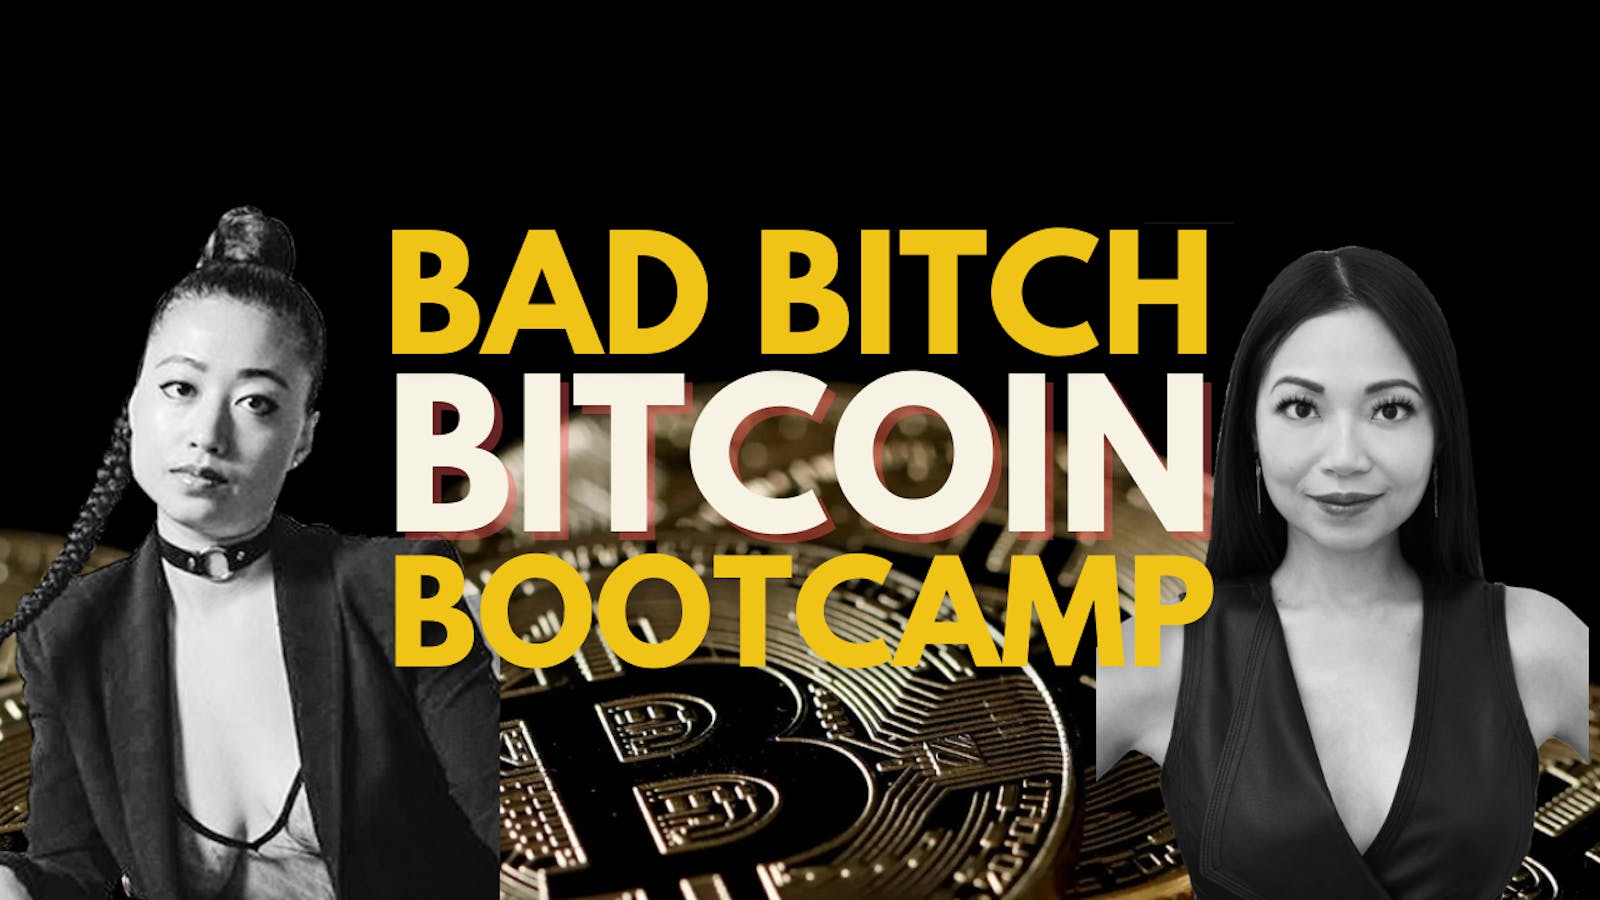 Bad Bitch Bitcoin Bootcamp: Intro Class. Weds 2/9 @ 5pm PST/8pm EST